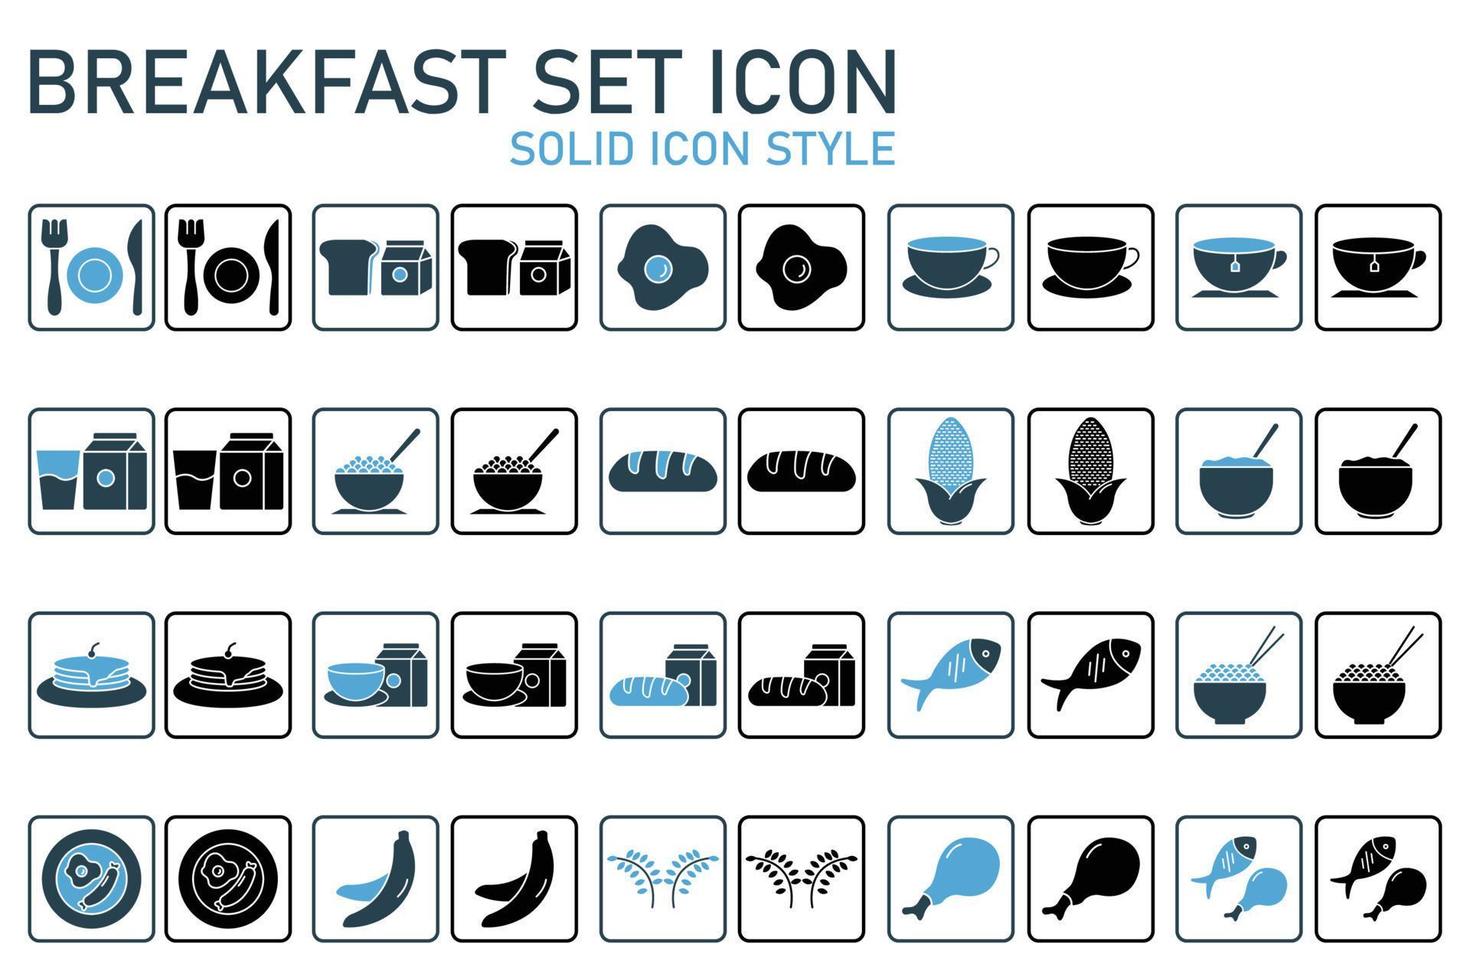 Breakfast set icon illustration. icon related to food and drink. Solid icon style. Simple vector design editable